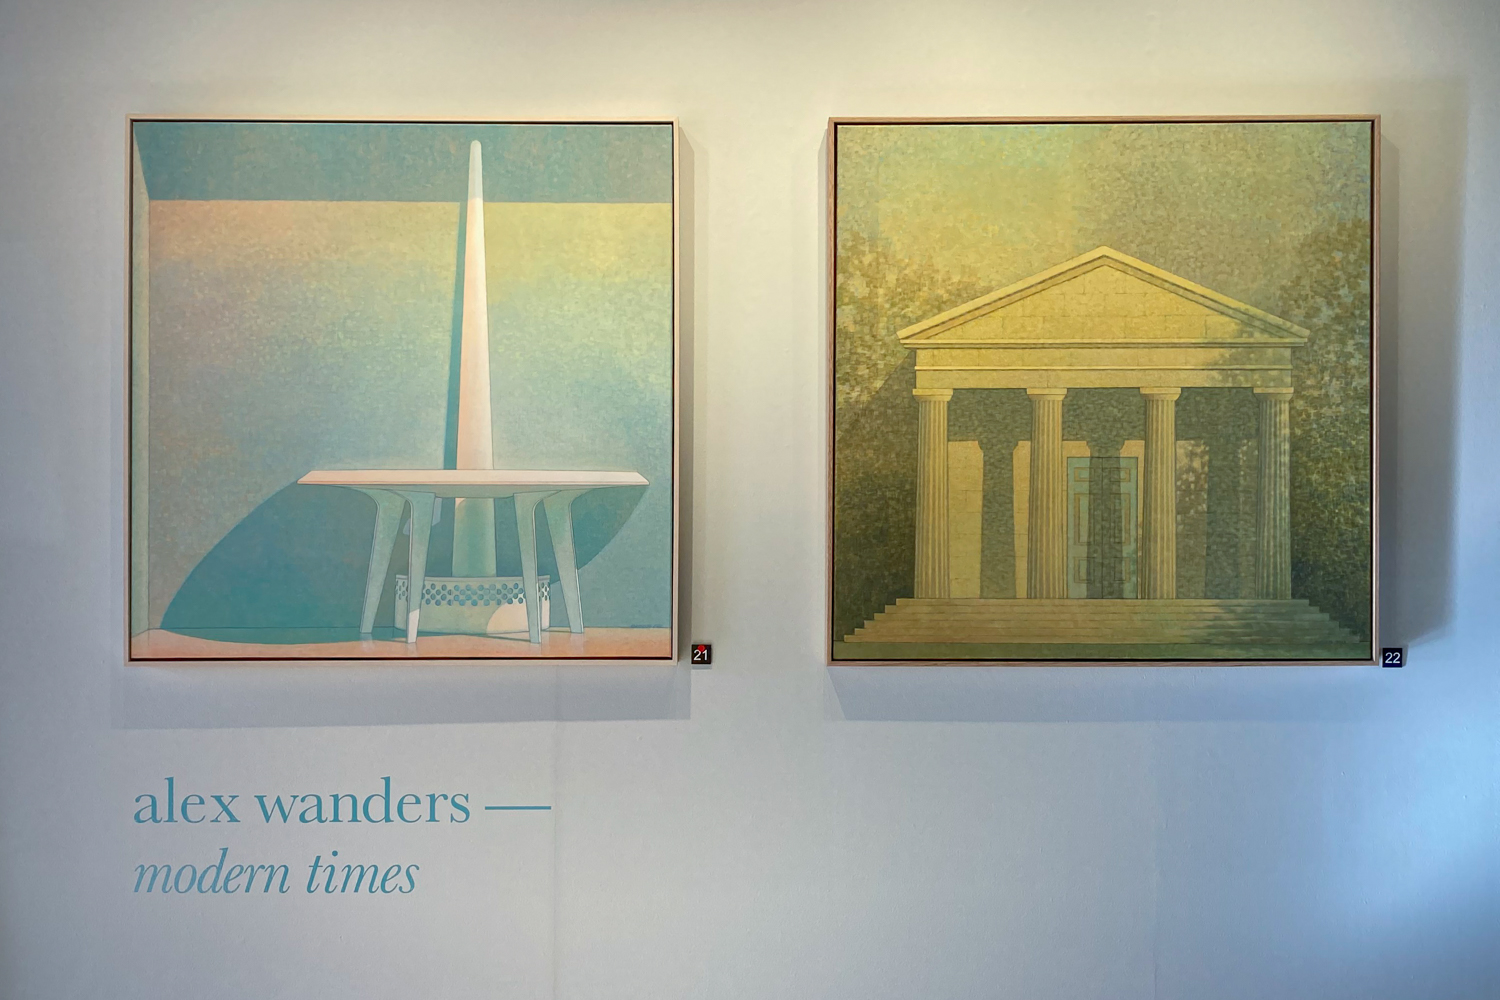 Paintings of a fountain and a hall with columns out front with the text "Alex Wanders—Modern times" beneath